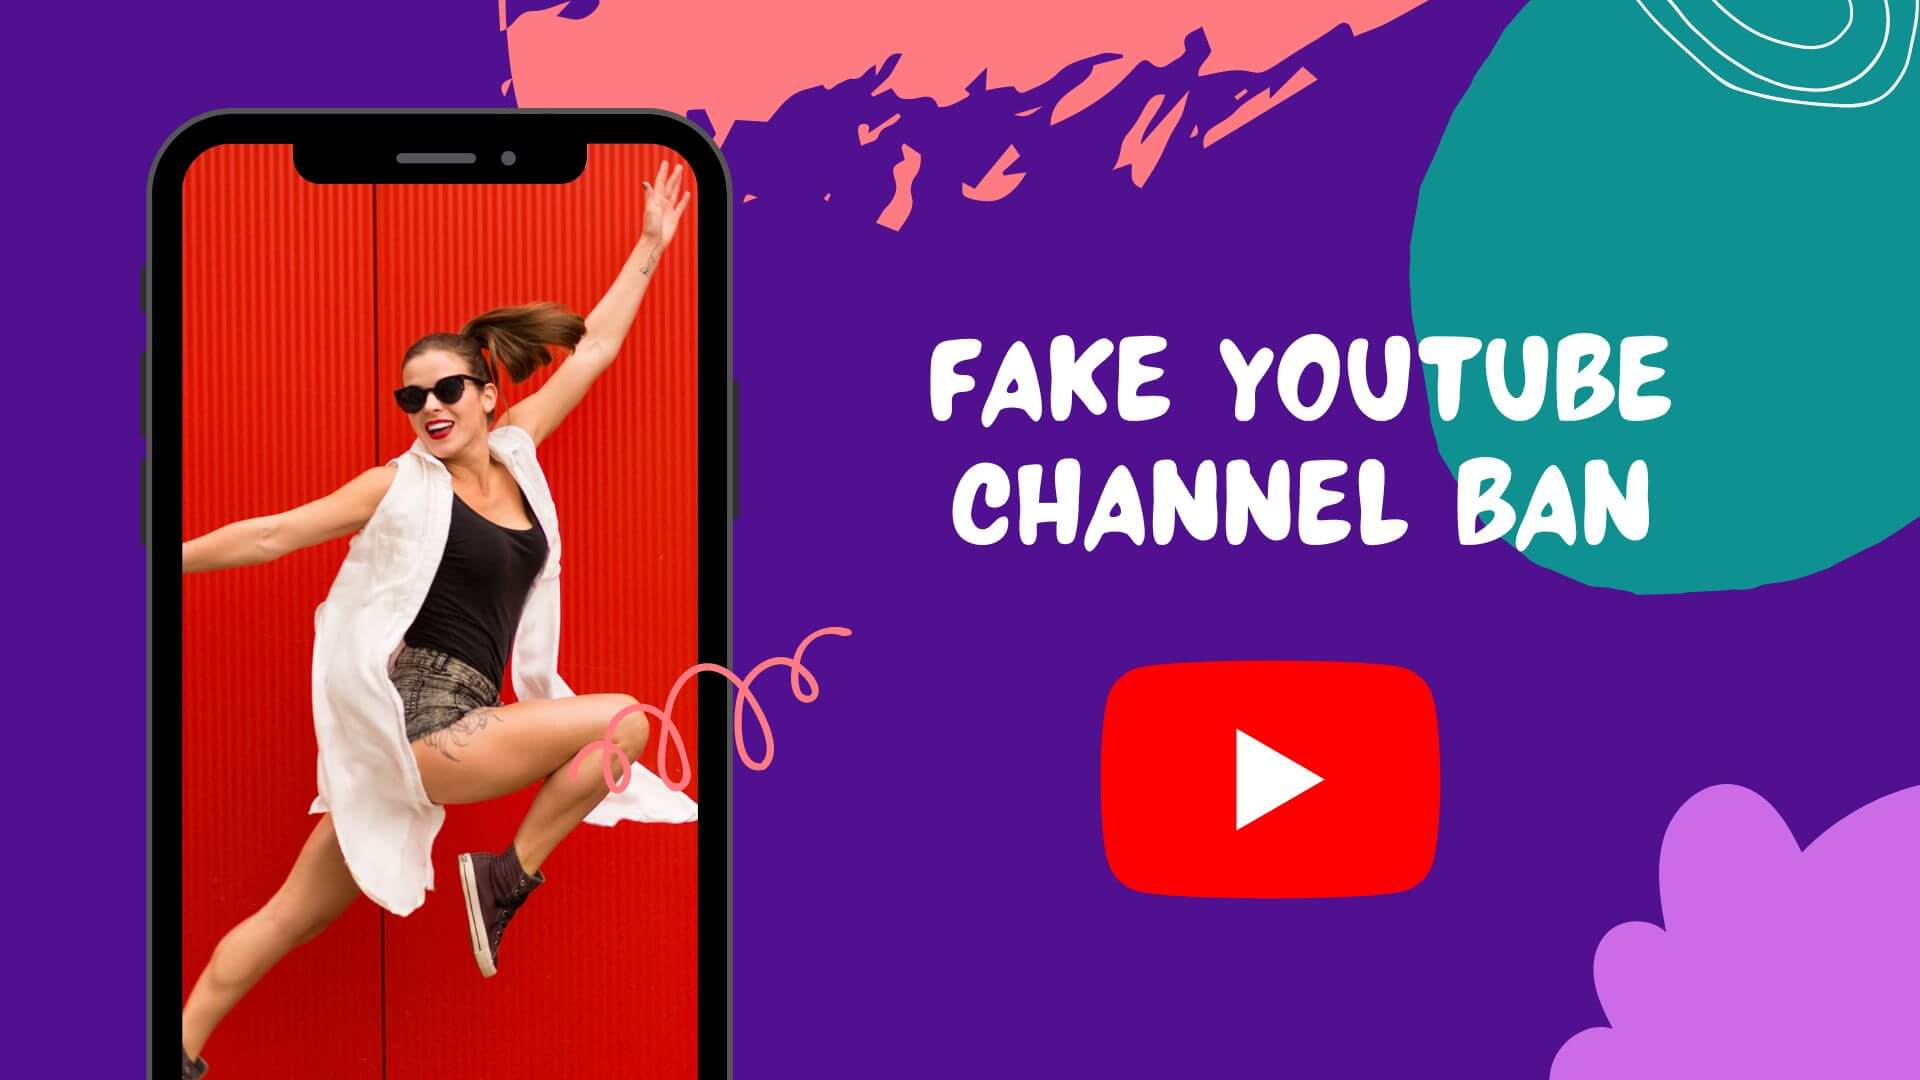 RajkotUpdates.News: A Ban on Fake YouTube Channels that Mislead Users, the Ministry Said